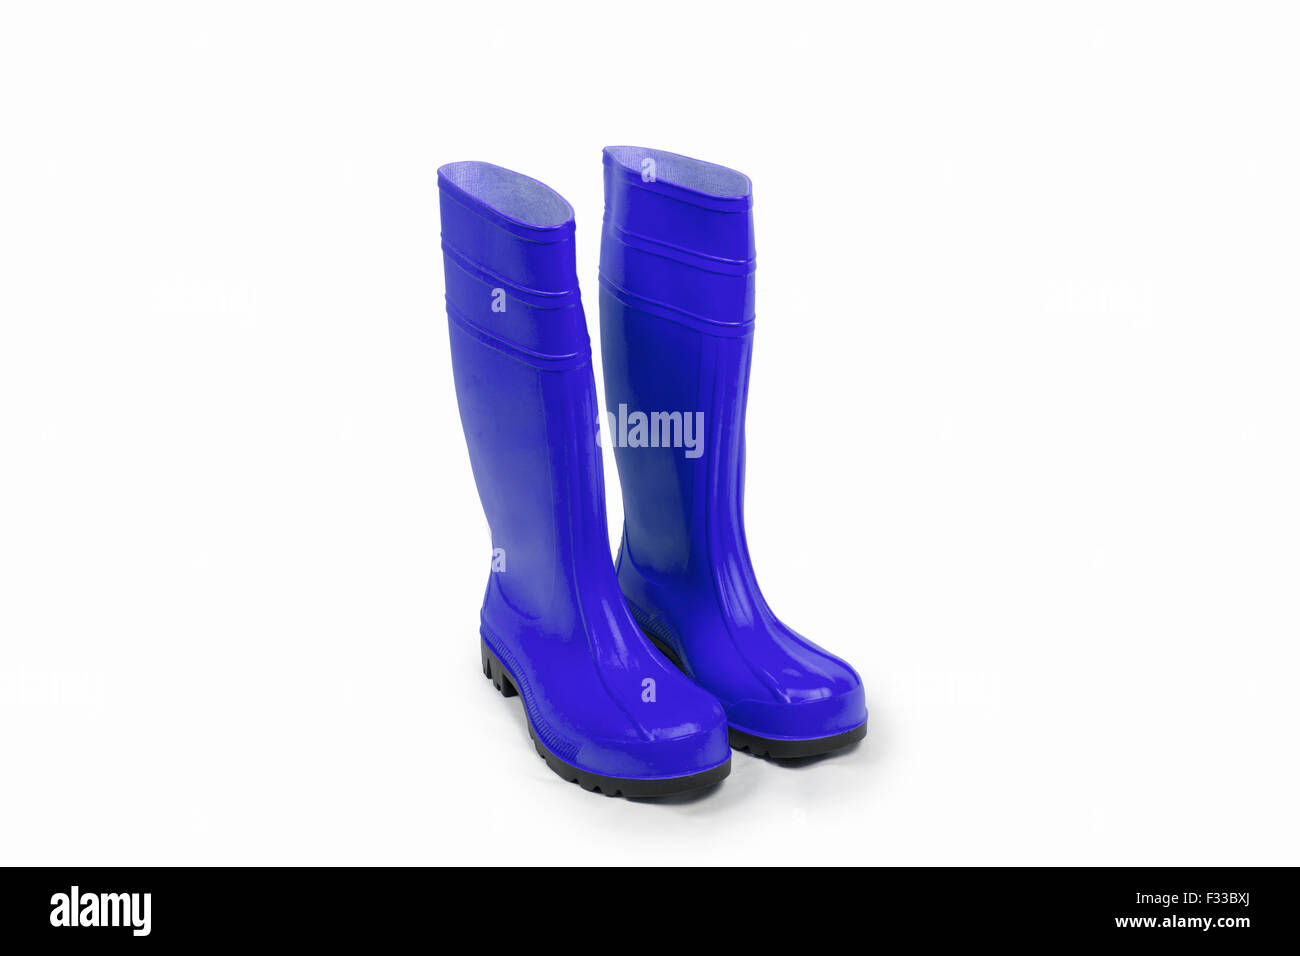 Rubber boots and umbreall isolated Stock Photo